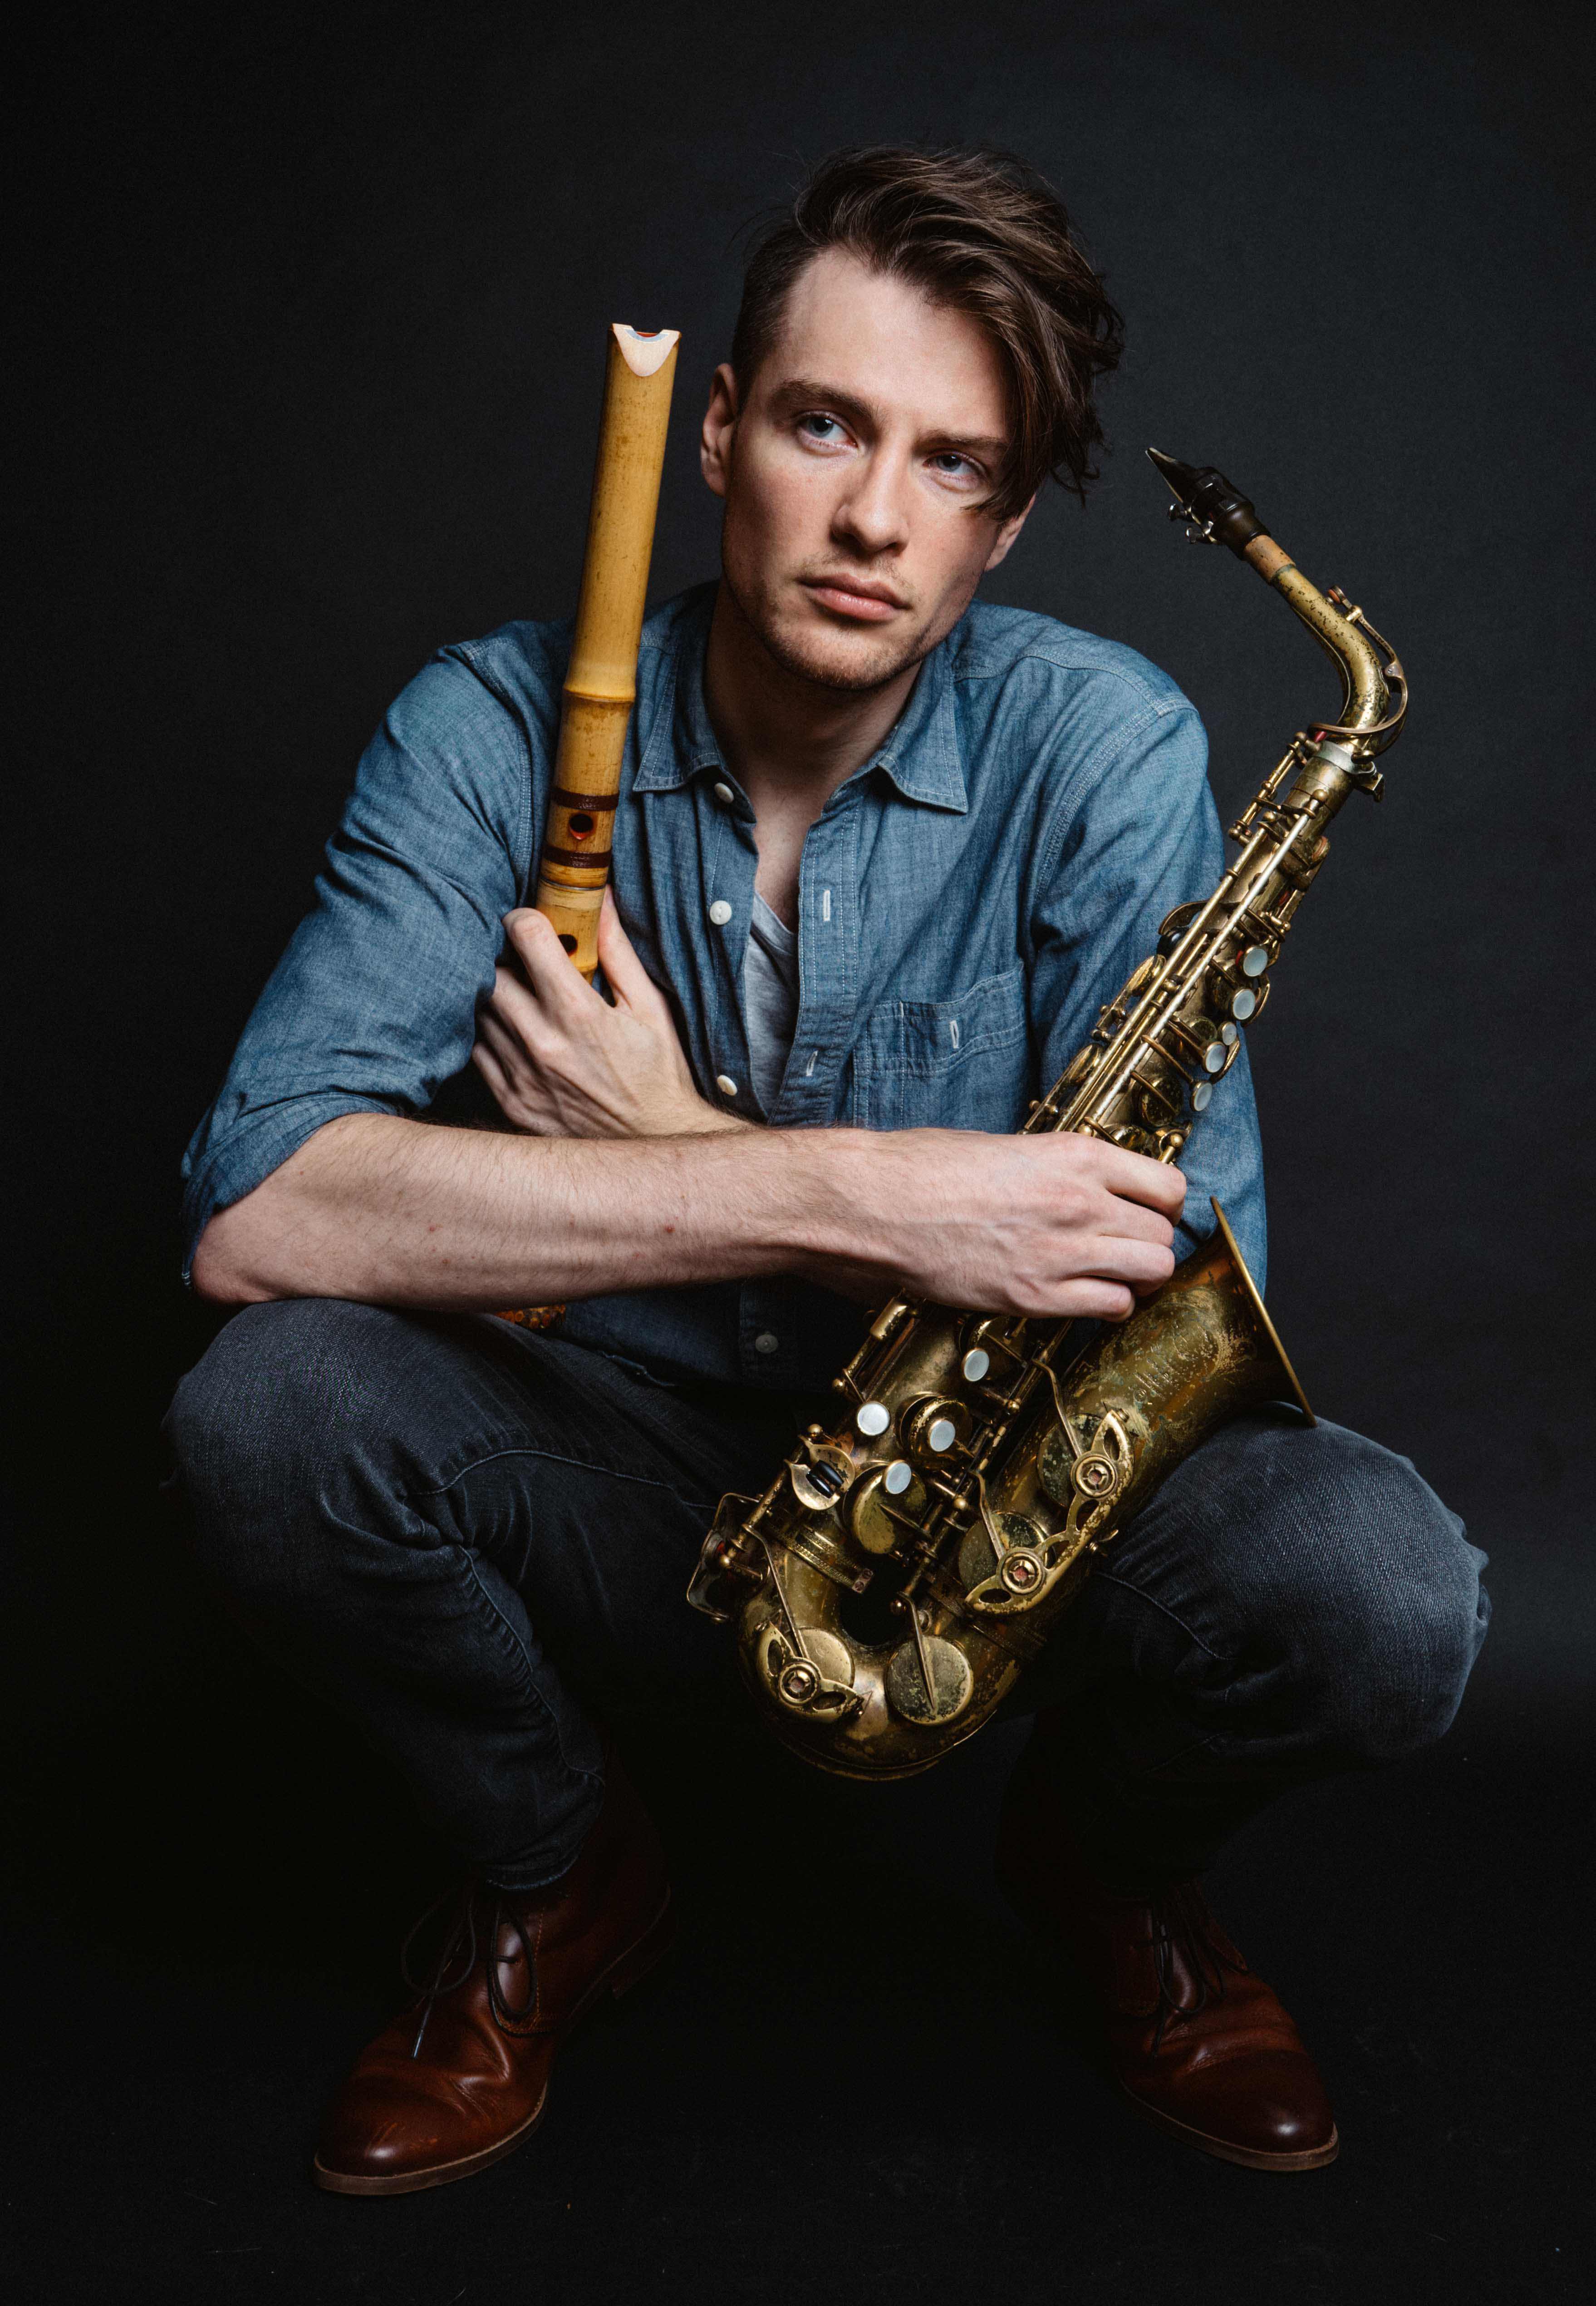 A person kneels down holding a saxophone. He is wearing a long sleeve blue button down shirt.